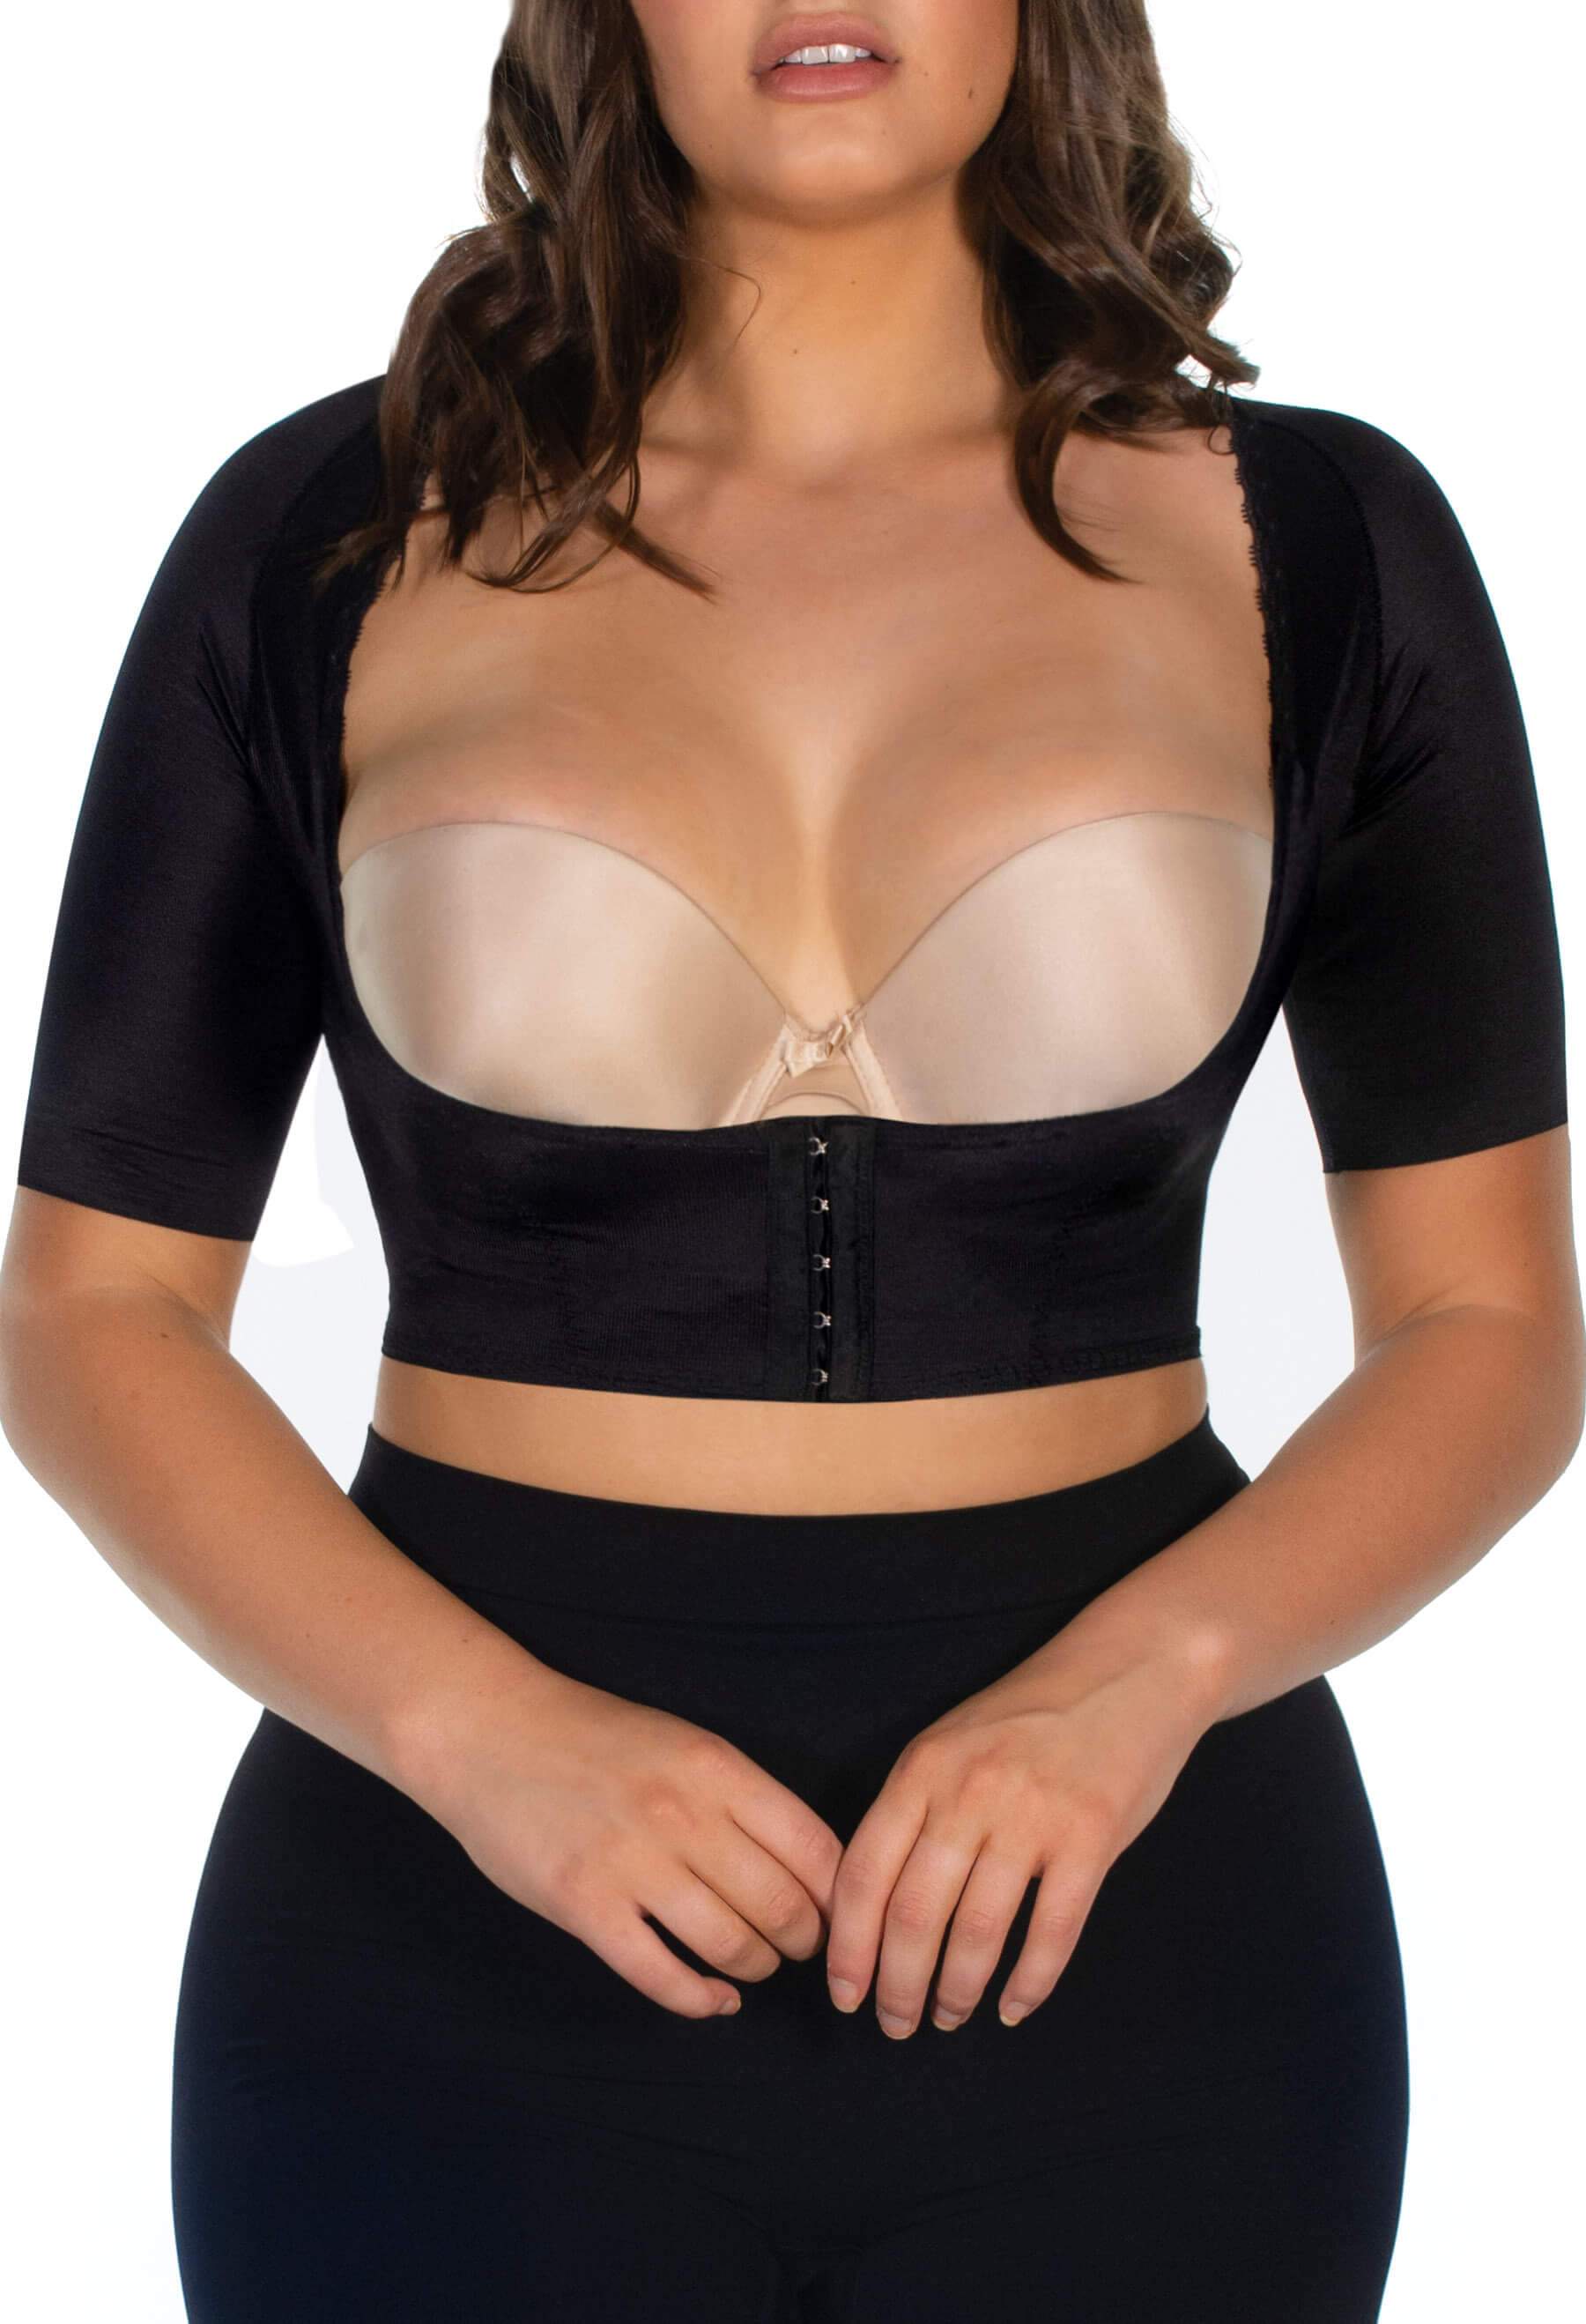 Seamless Shaping Camisole with Arm Control Shapewear _ Arm Shaper 